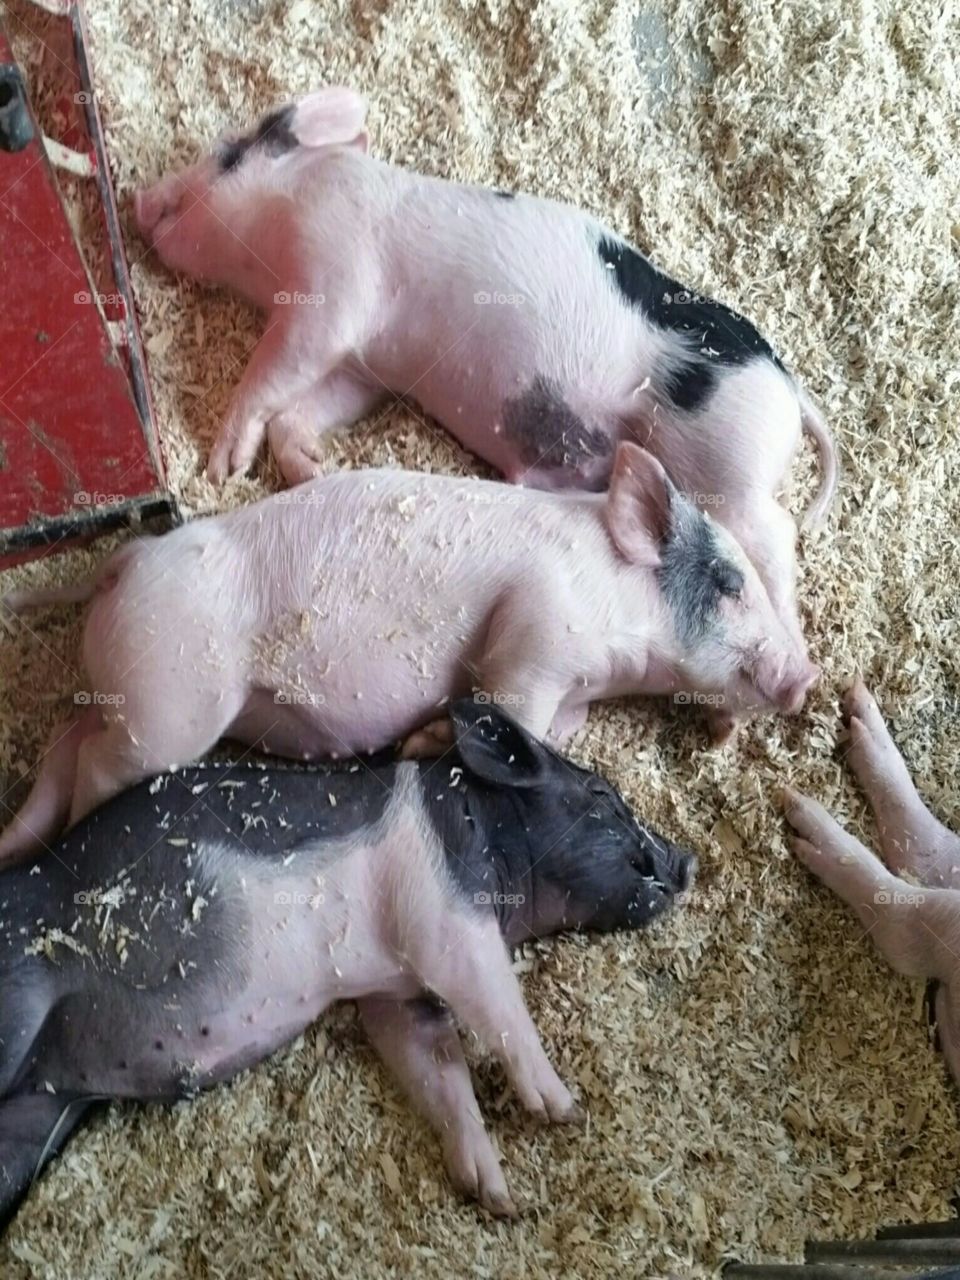 piglets at the fair